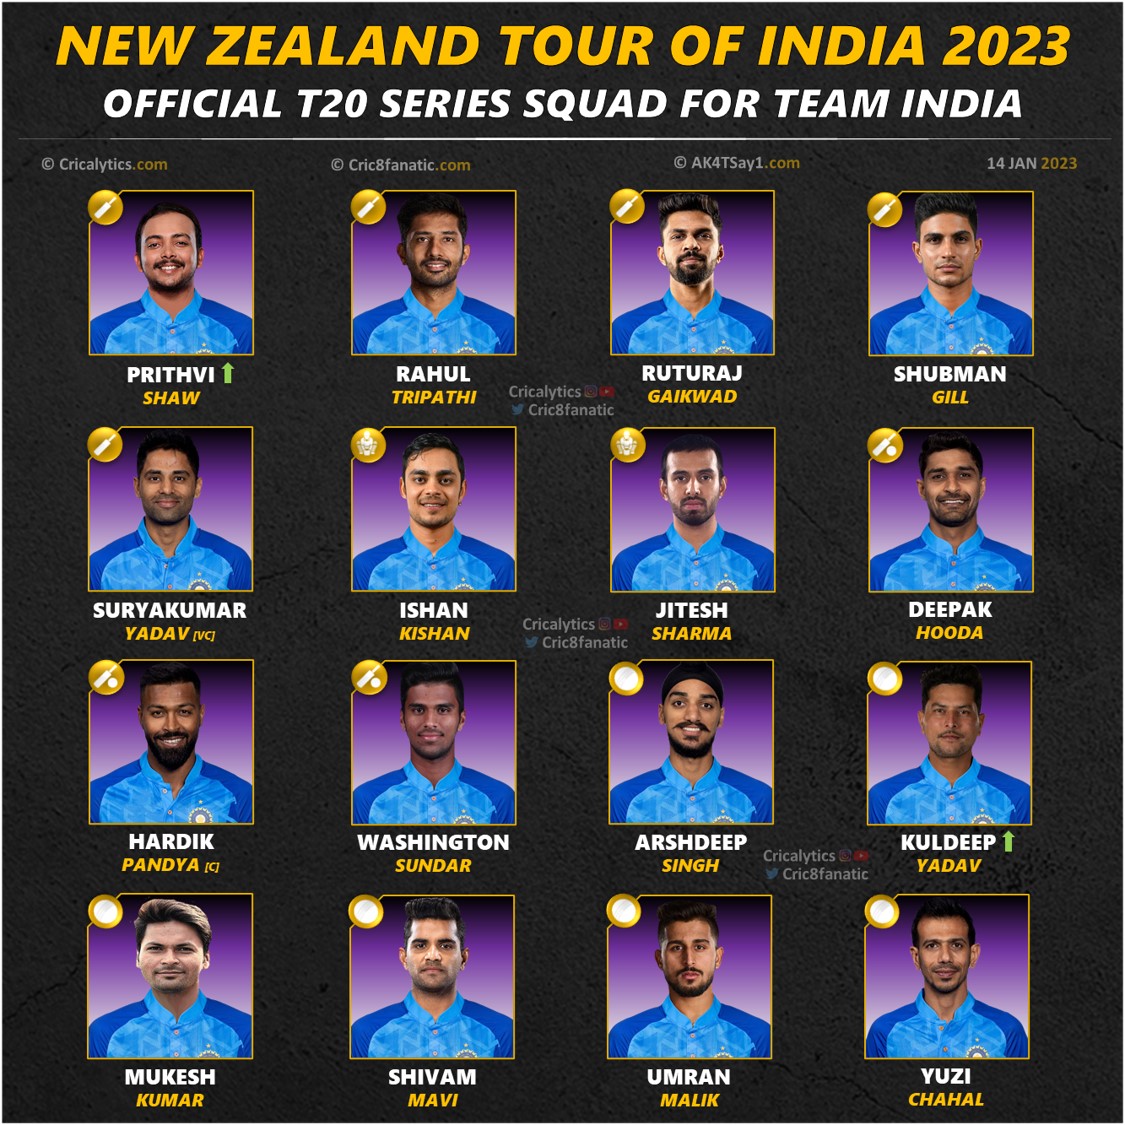 india vs new zealand 2023 official t20 series squad and players list